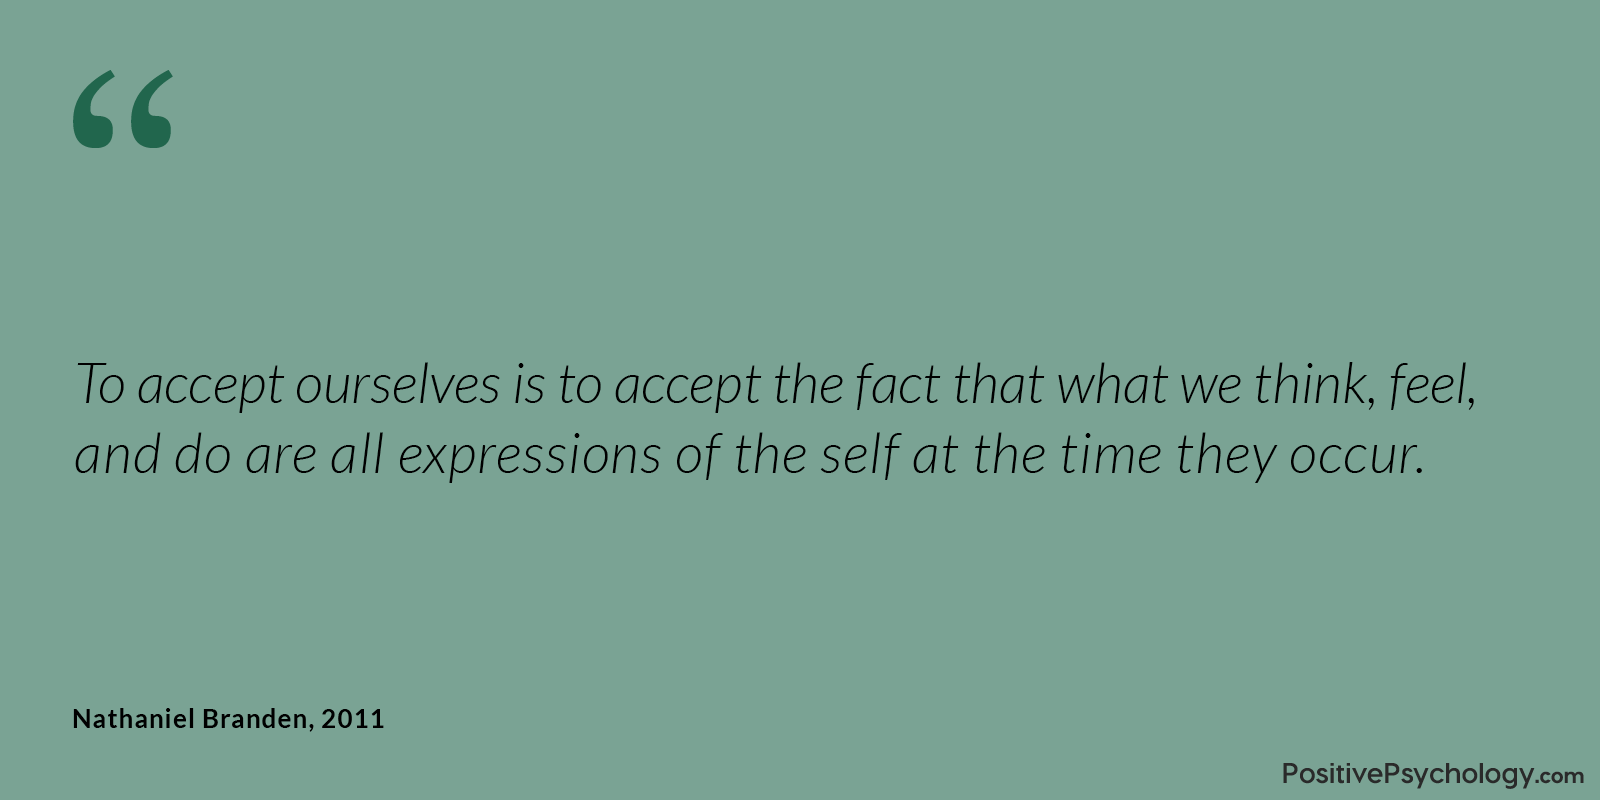 Expressions of the self